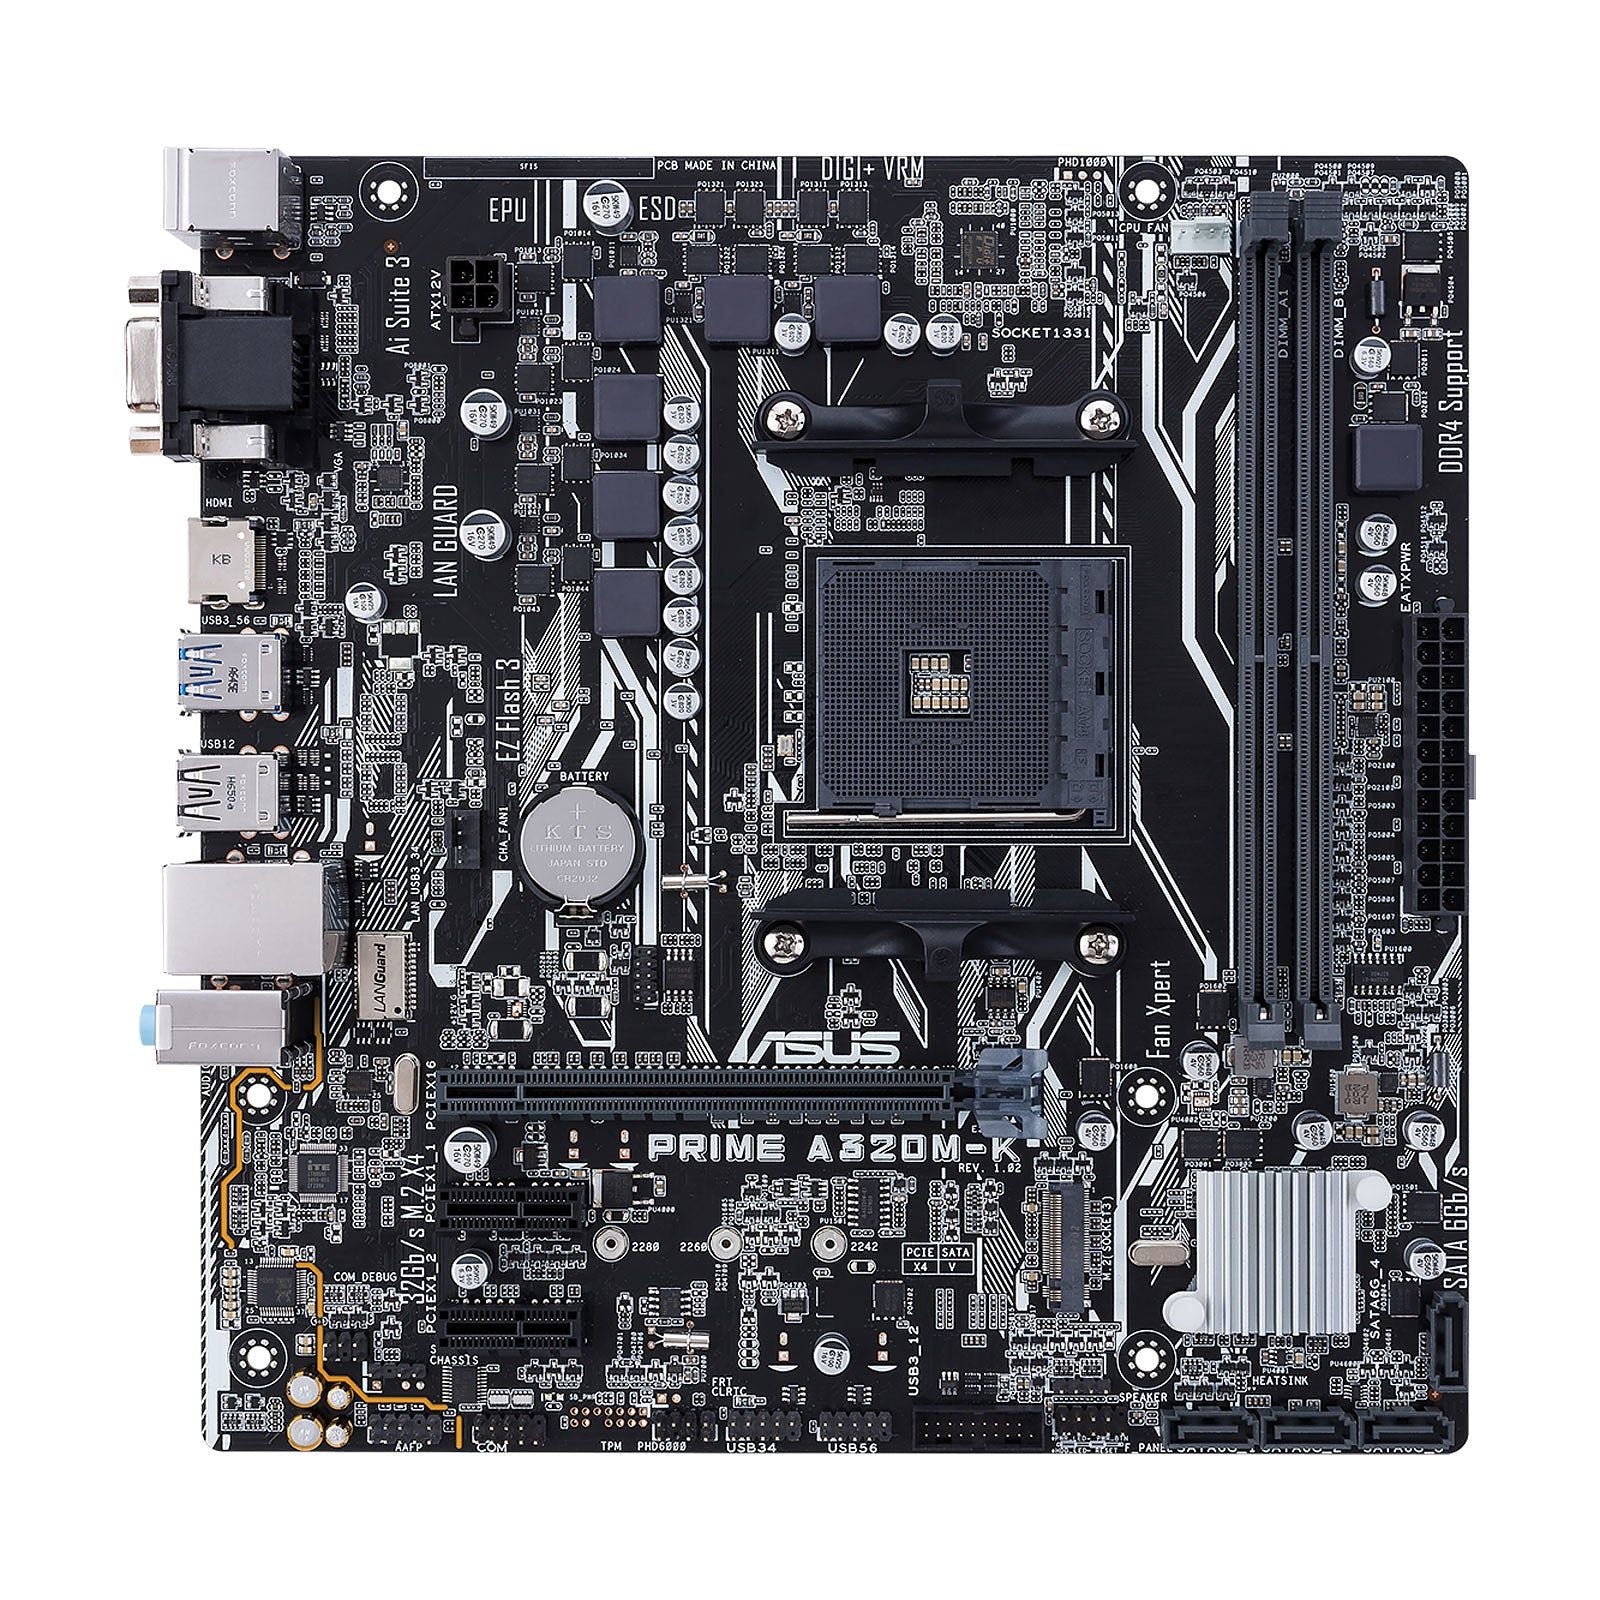 ASUS PRIME A320M-K - OVERCLOCK Computer